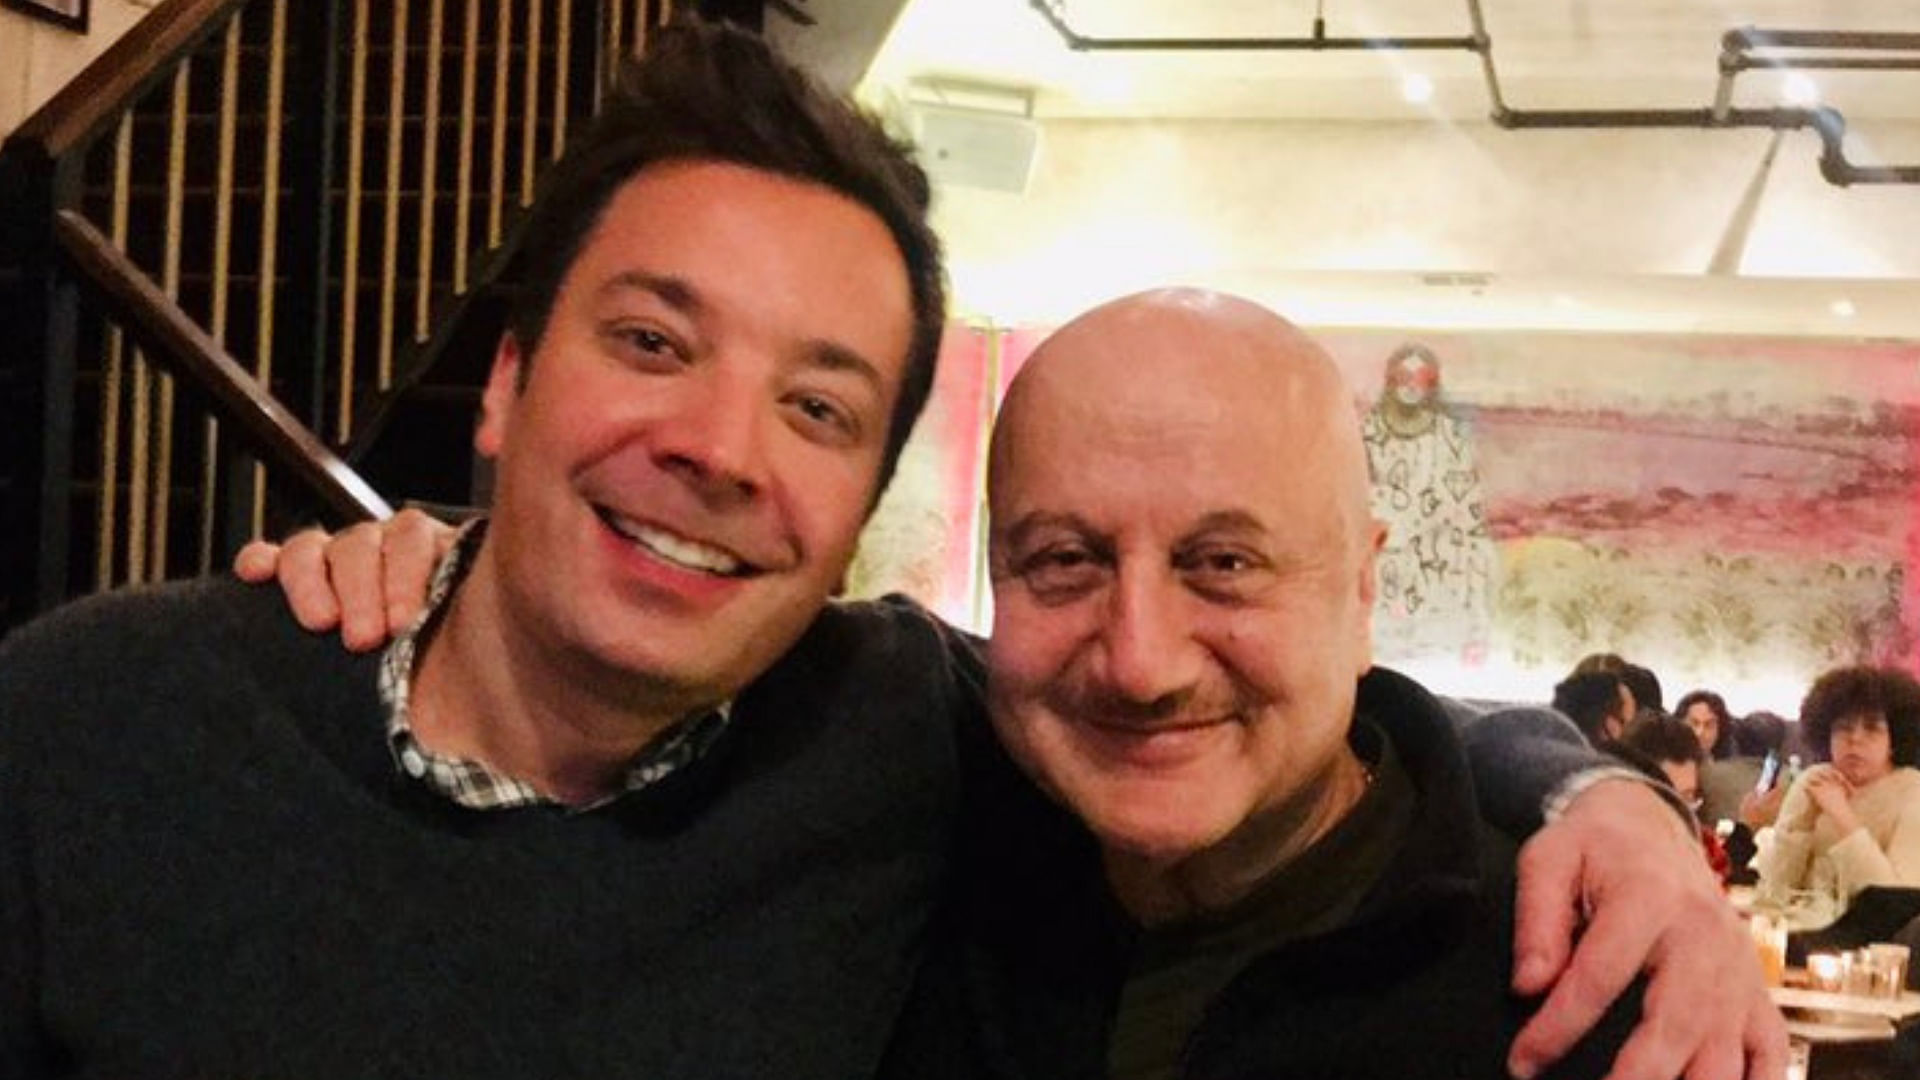 Anupam Kher takes a selfie with Jimmy Fallon.